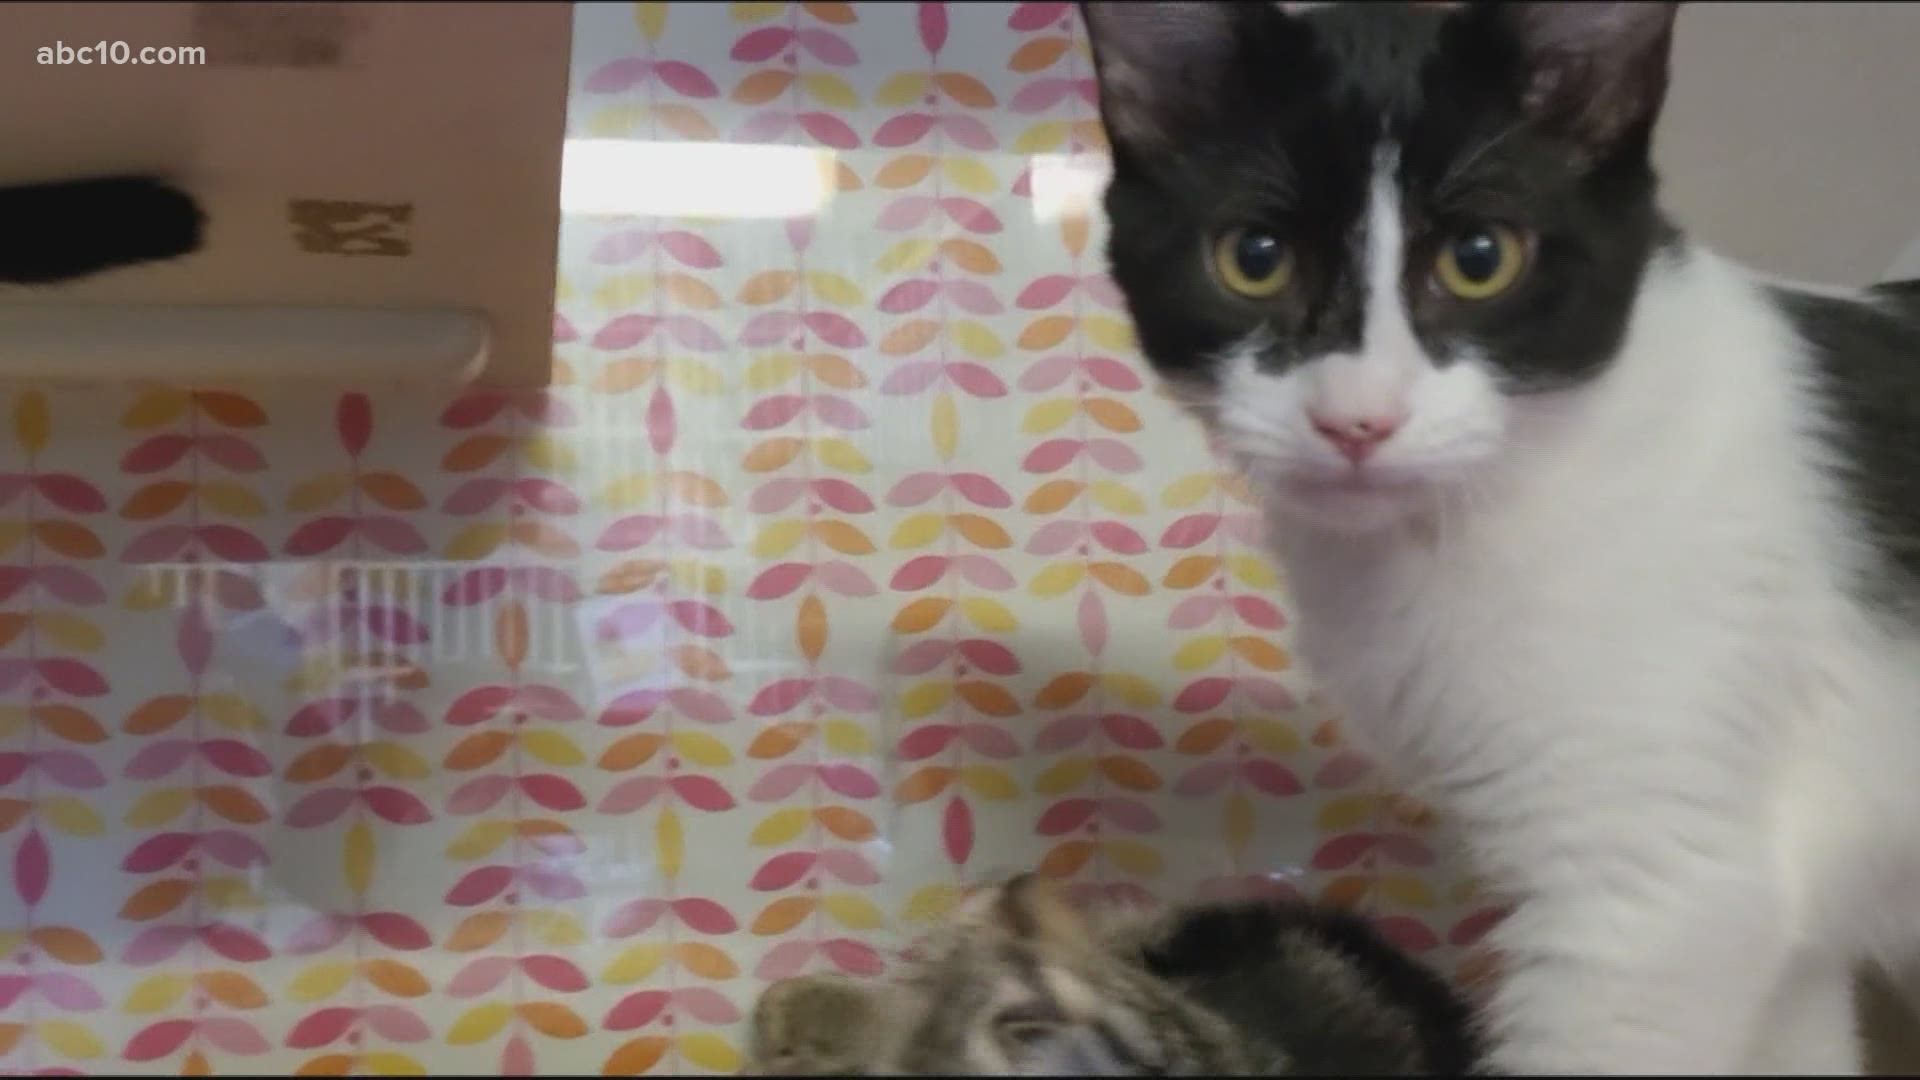 Yolo County Animal Shelter shares some kitten 'pawsitivity'